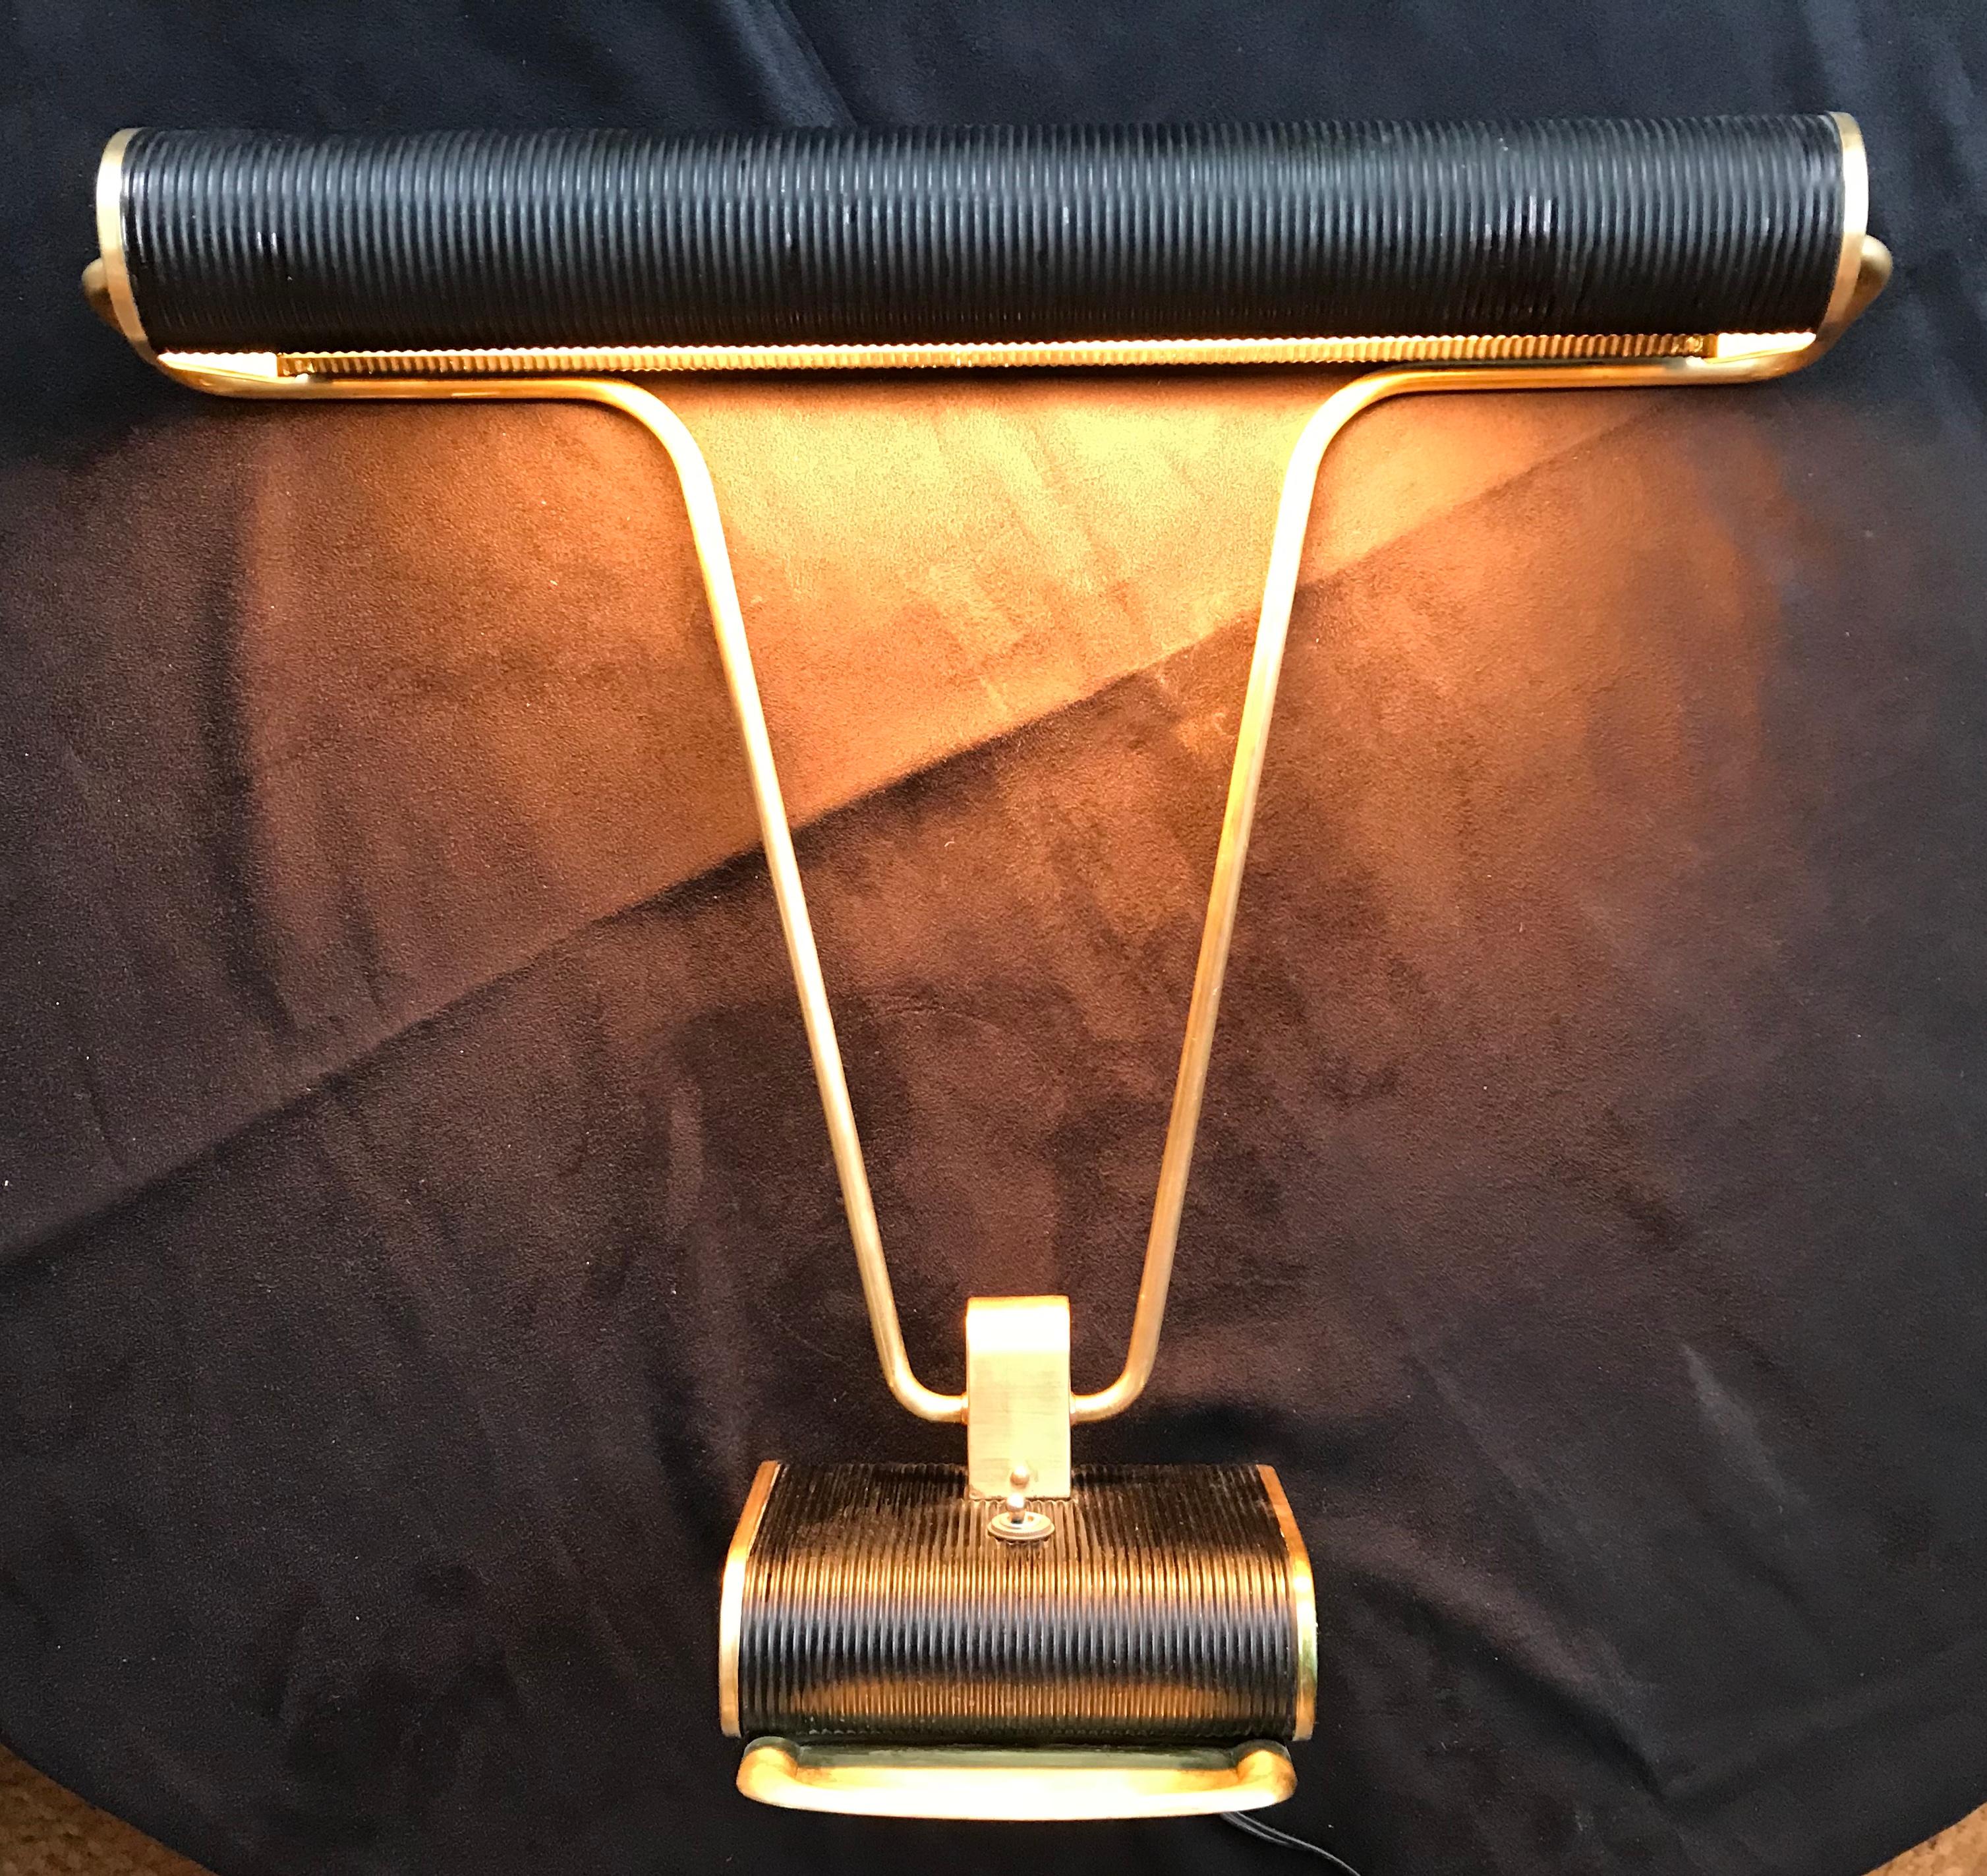 Beautuful Art Deco Modern style table desk lamp by Eileen Gray in blackened metal and gilt brass in a very good general condition. France, 1930.
Dimensions :
Width 44 cm x H 39 cm x depth 17 cm
Base 15 cm x 15 cm
Eileen Gray Brownswood 1878